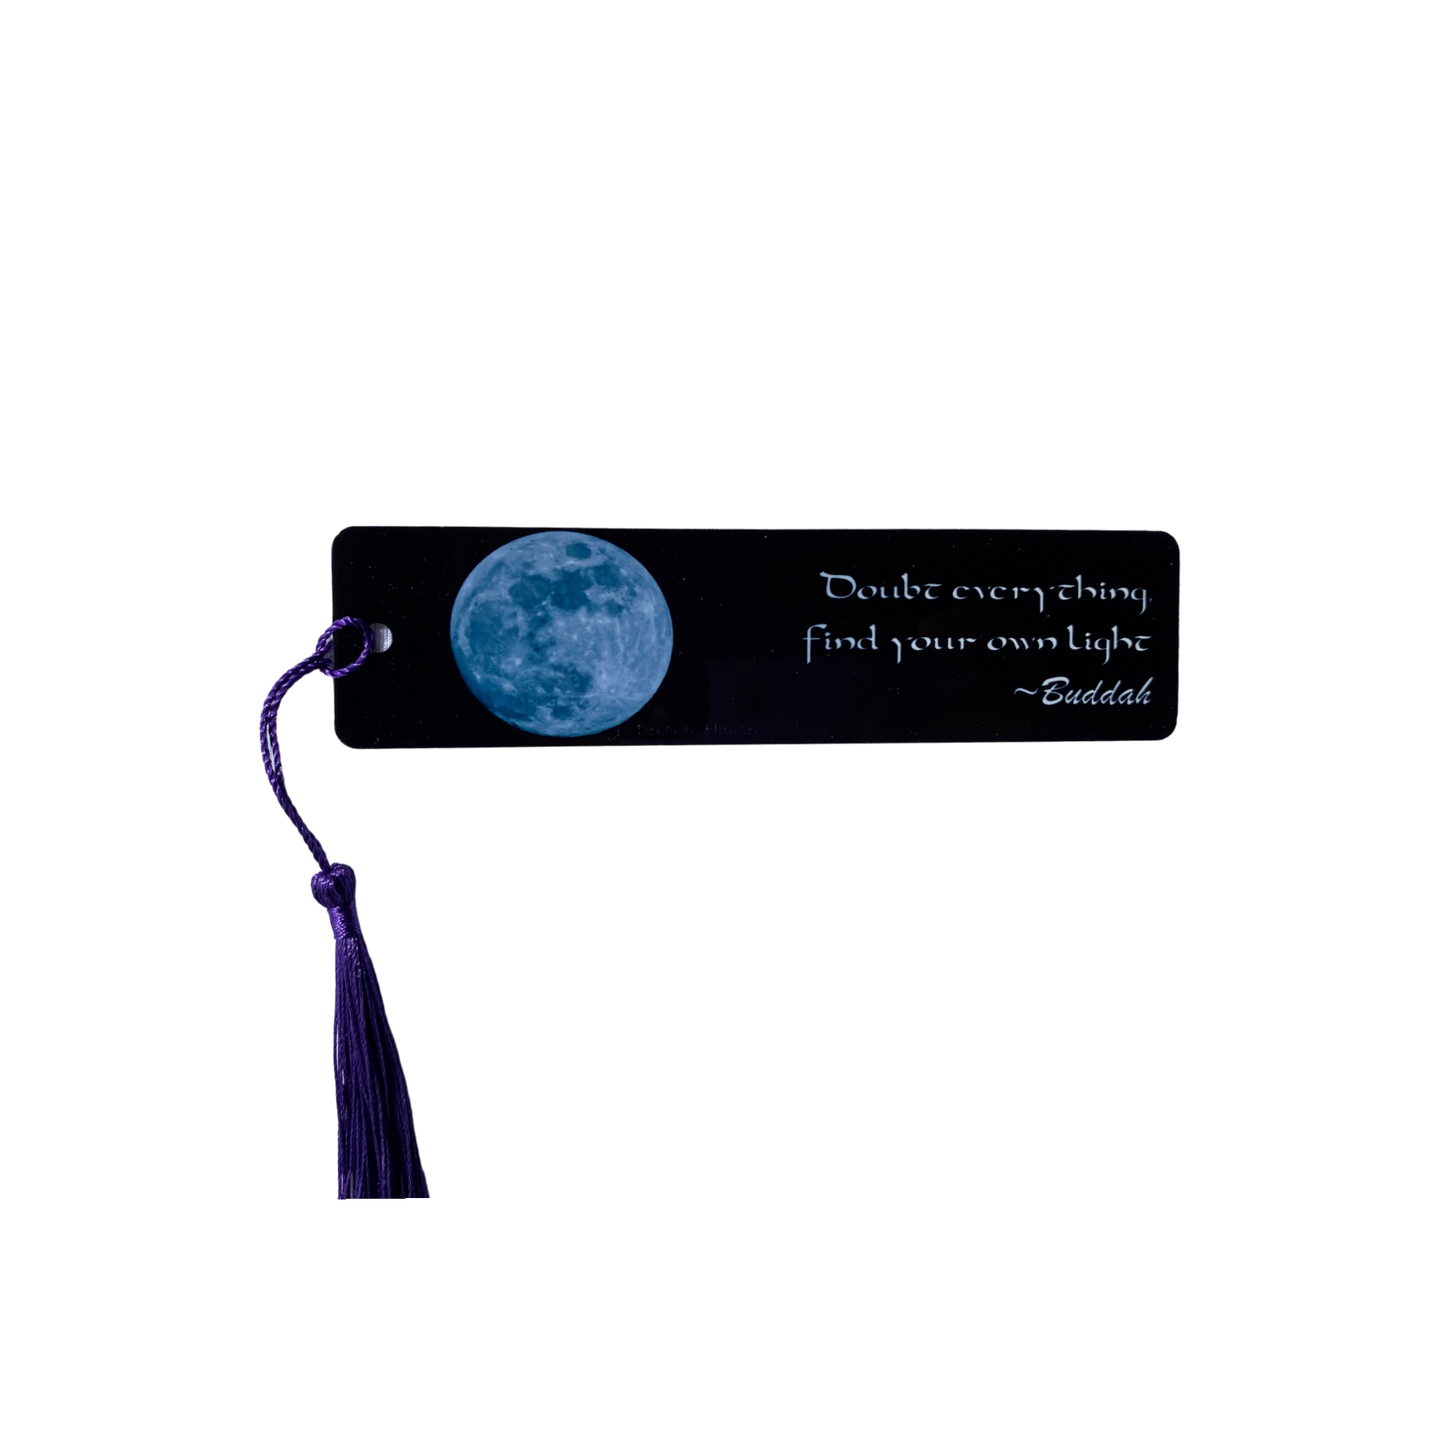 Bookmark-metal Full moon taken in Sedona with inspirational quote